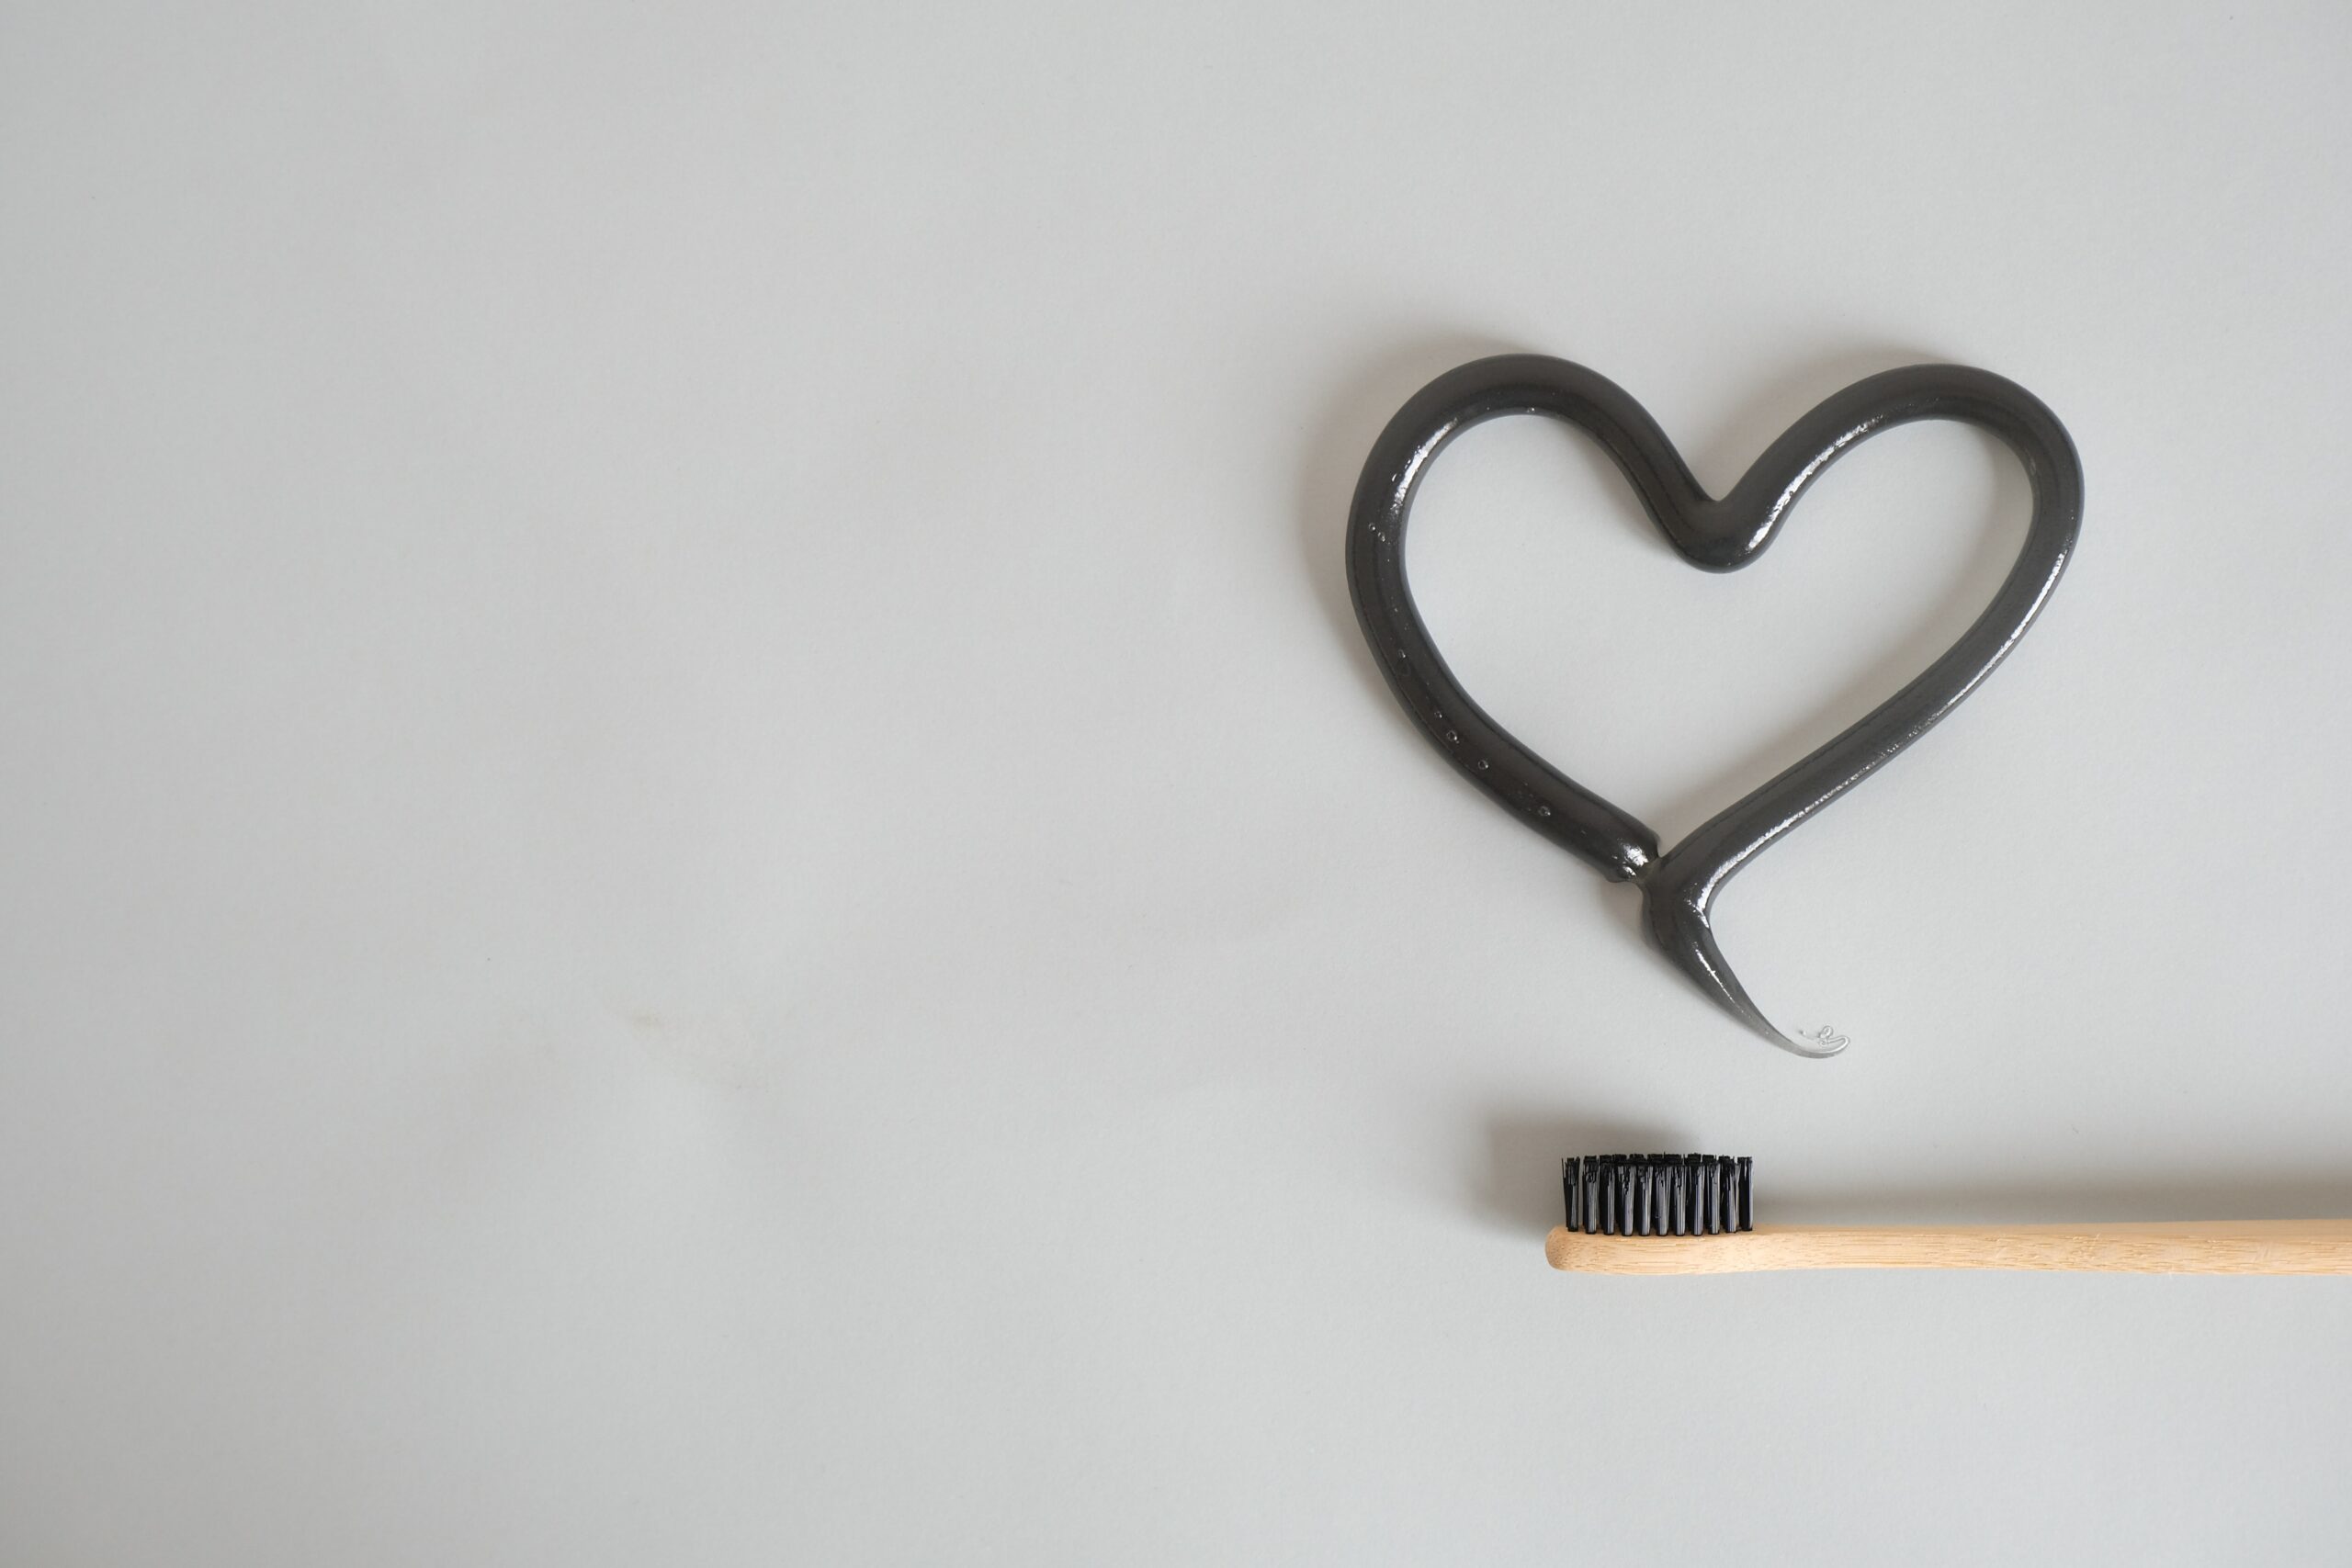 A wooden toothbrush is lying on a white countertop. Toothpaste is frosted in the shape of a heart next to it.